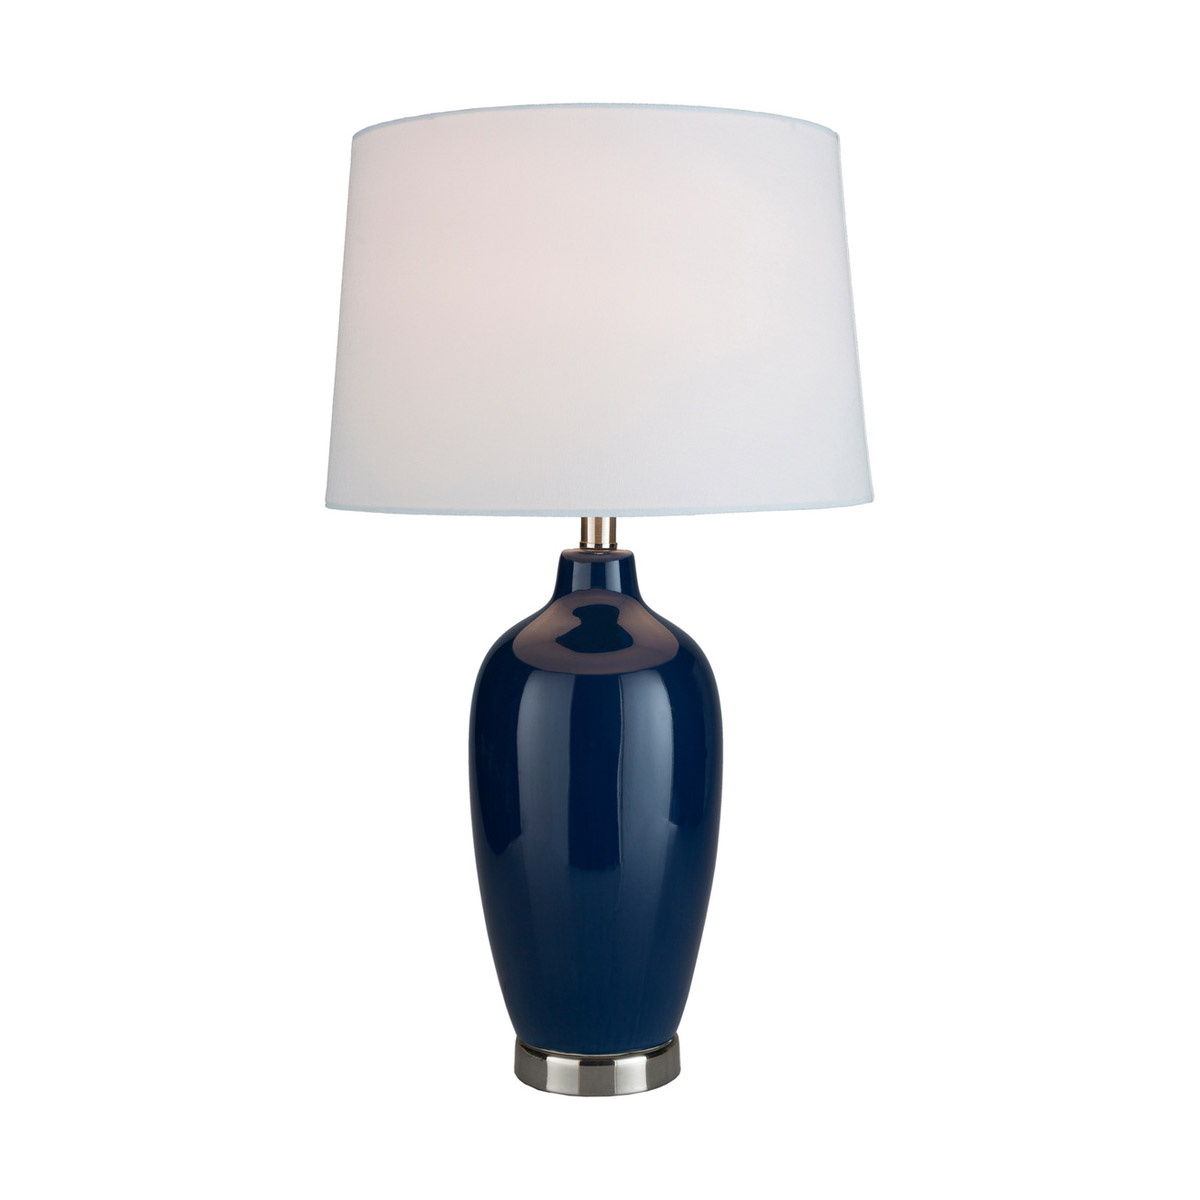 Details About Surya Lye 001 Lyle 27 Inch 100 Watt Navy Table Lamp Portable Light with size 1200 X 1200